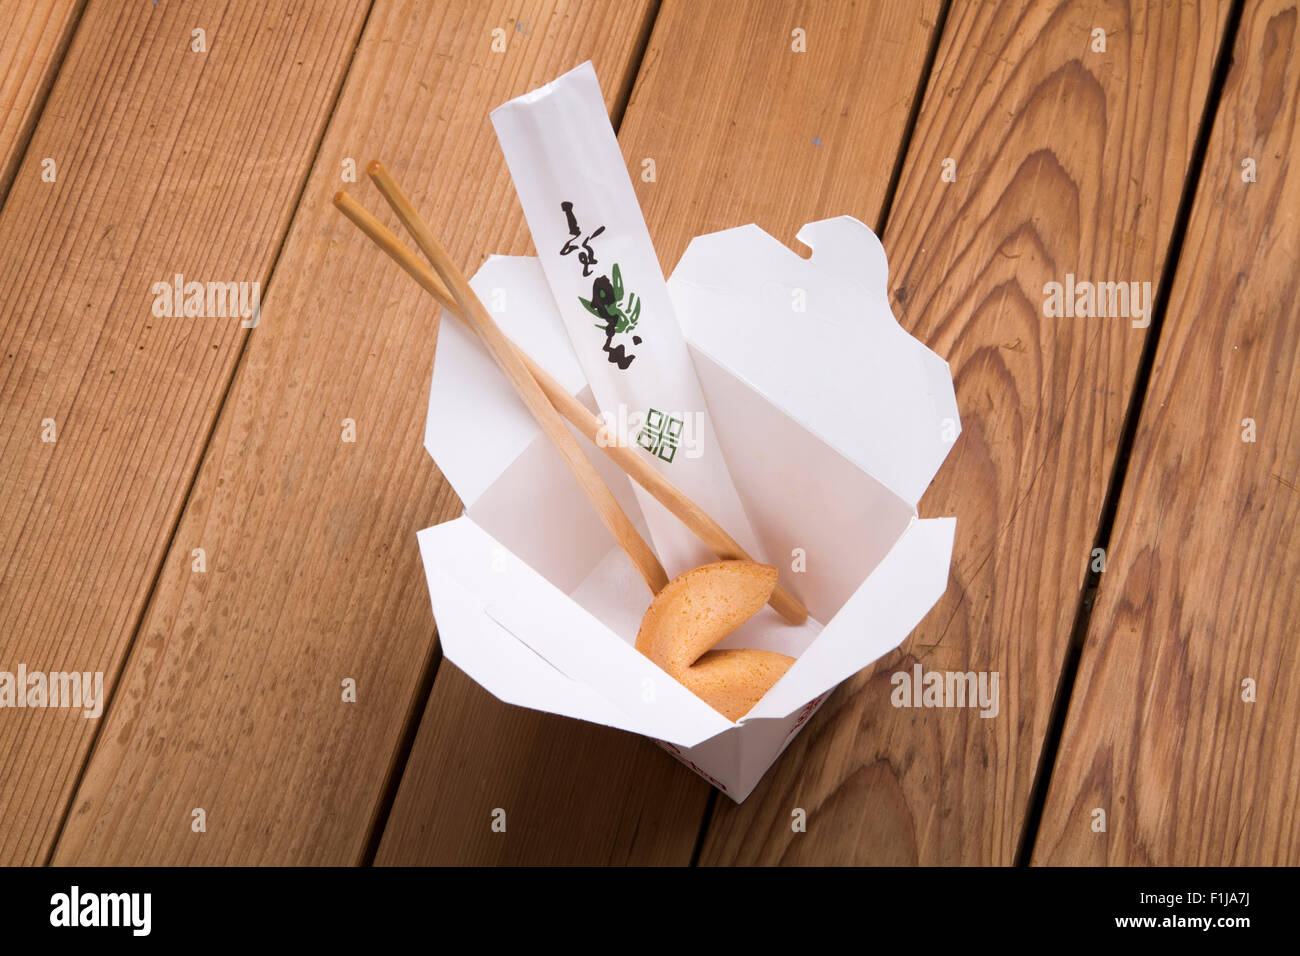 Chinese takeout carton on a wooden table with fortune cookie Stock Photo